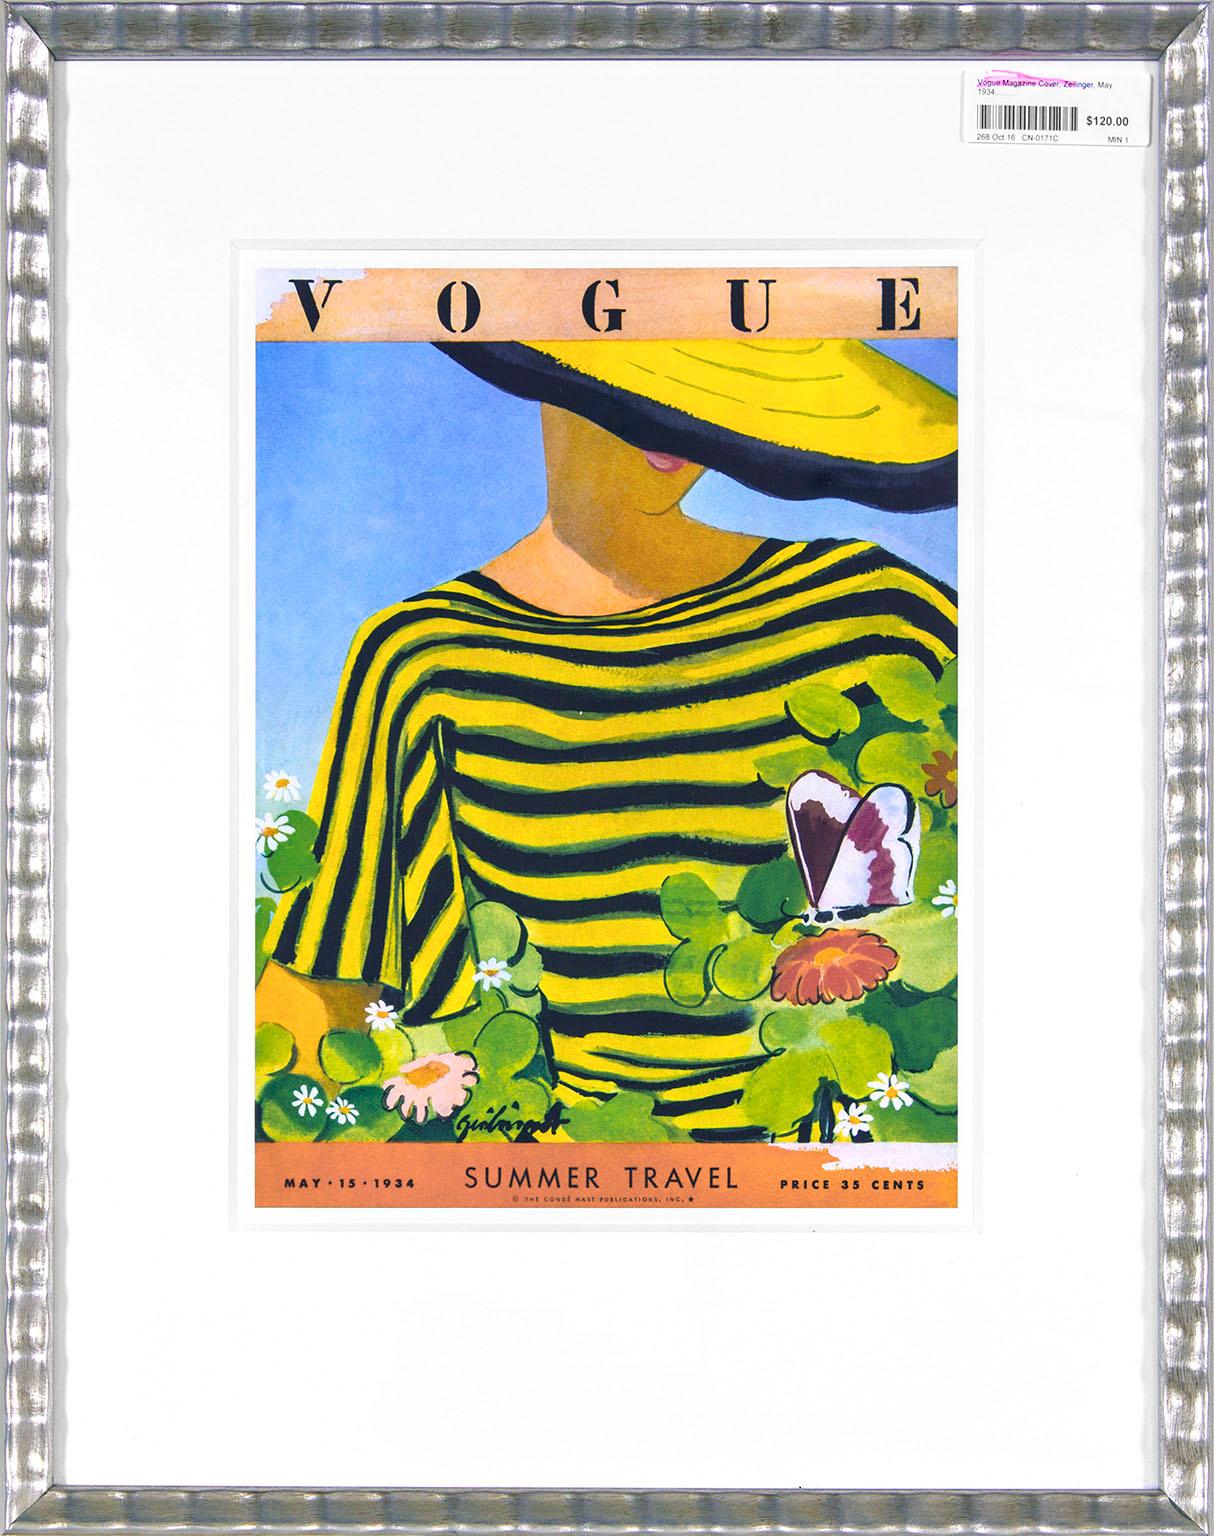 Framed print of May 15, 1934, "Vogue" magazine cover by Alix Zeilinger for the Summer Travel issue depicting a woman in a yellow hat and black and yellow stripes looking at a butterfly on a flower.